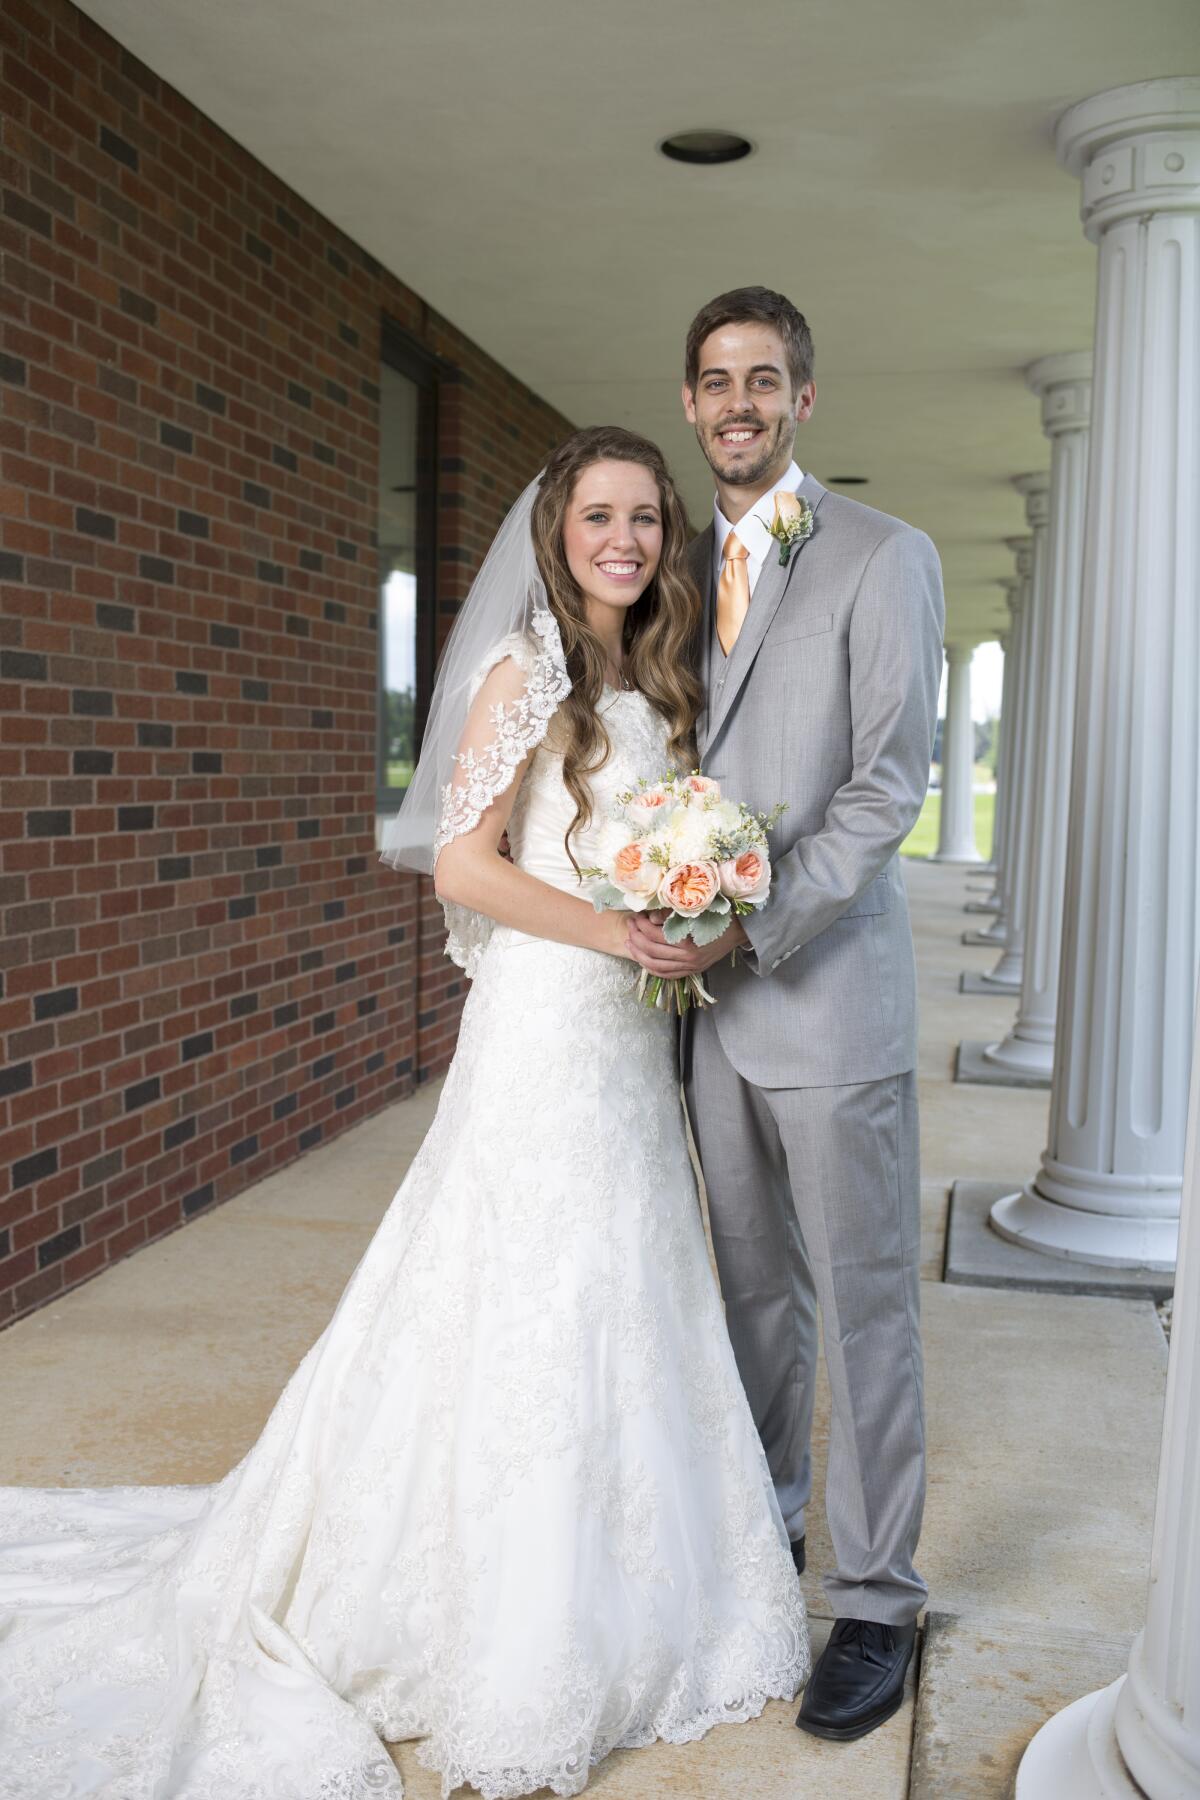 Jill Duggar in a white wedding dress and Derick Dillard in grey suit and tie.